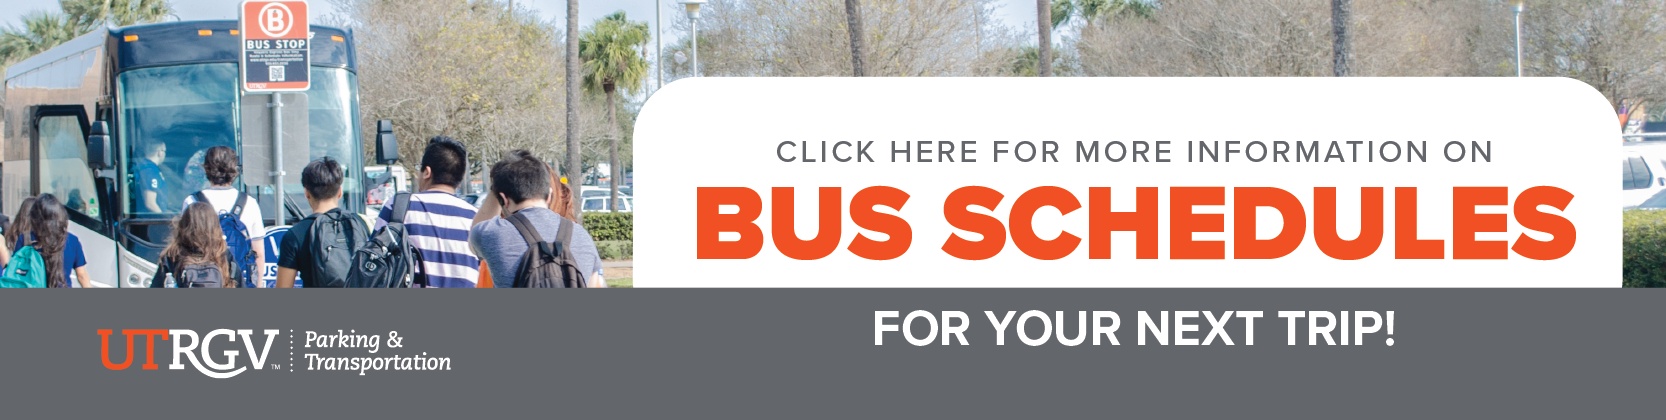 Click here for more information on bus schedules for your next trip. Page Banner 